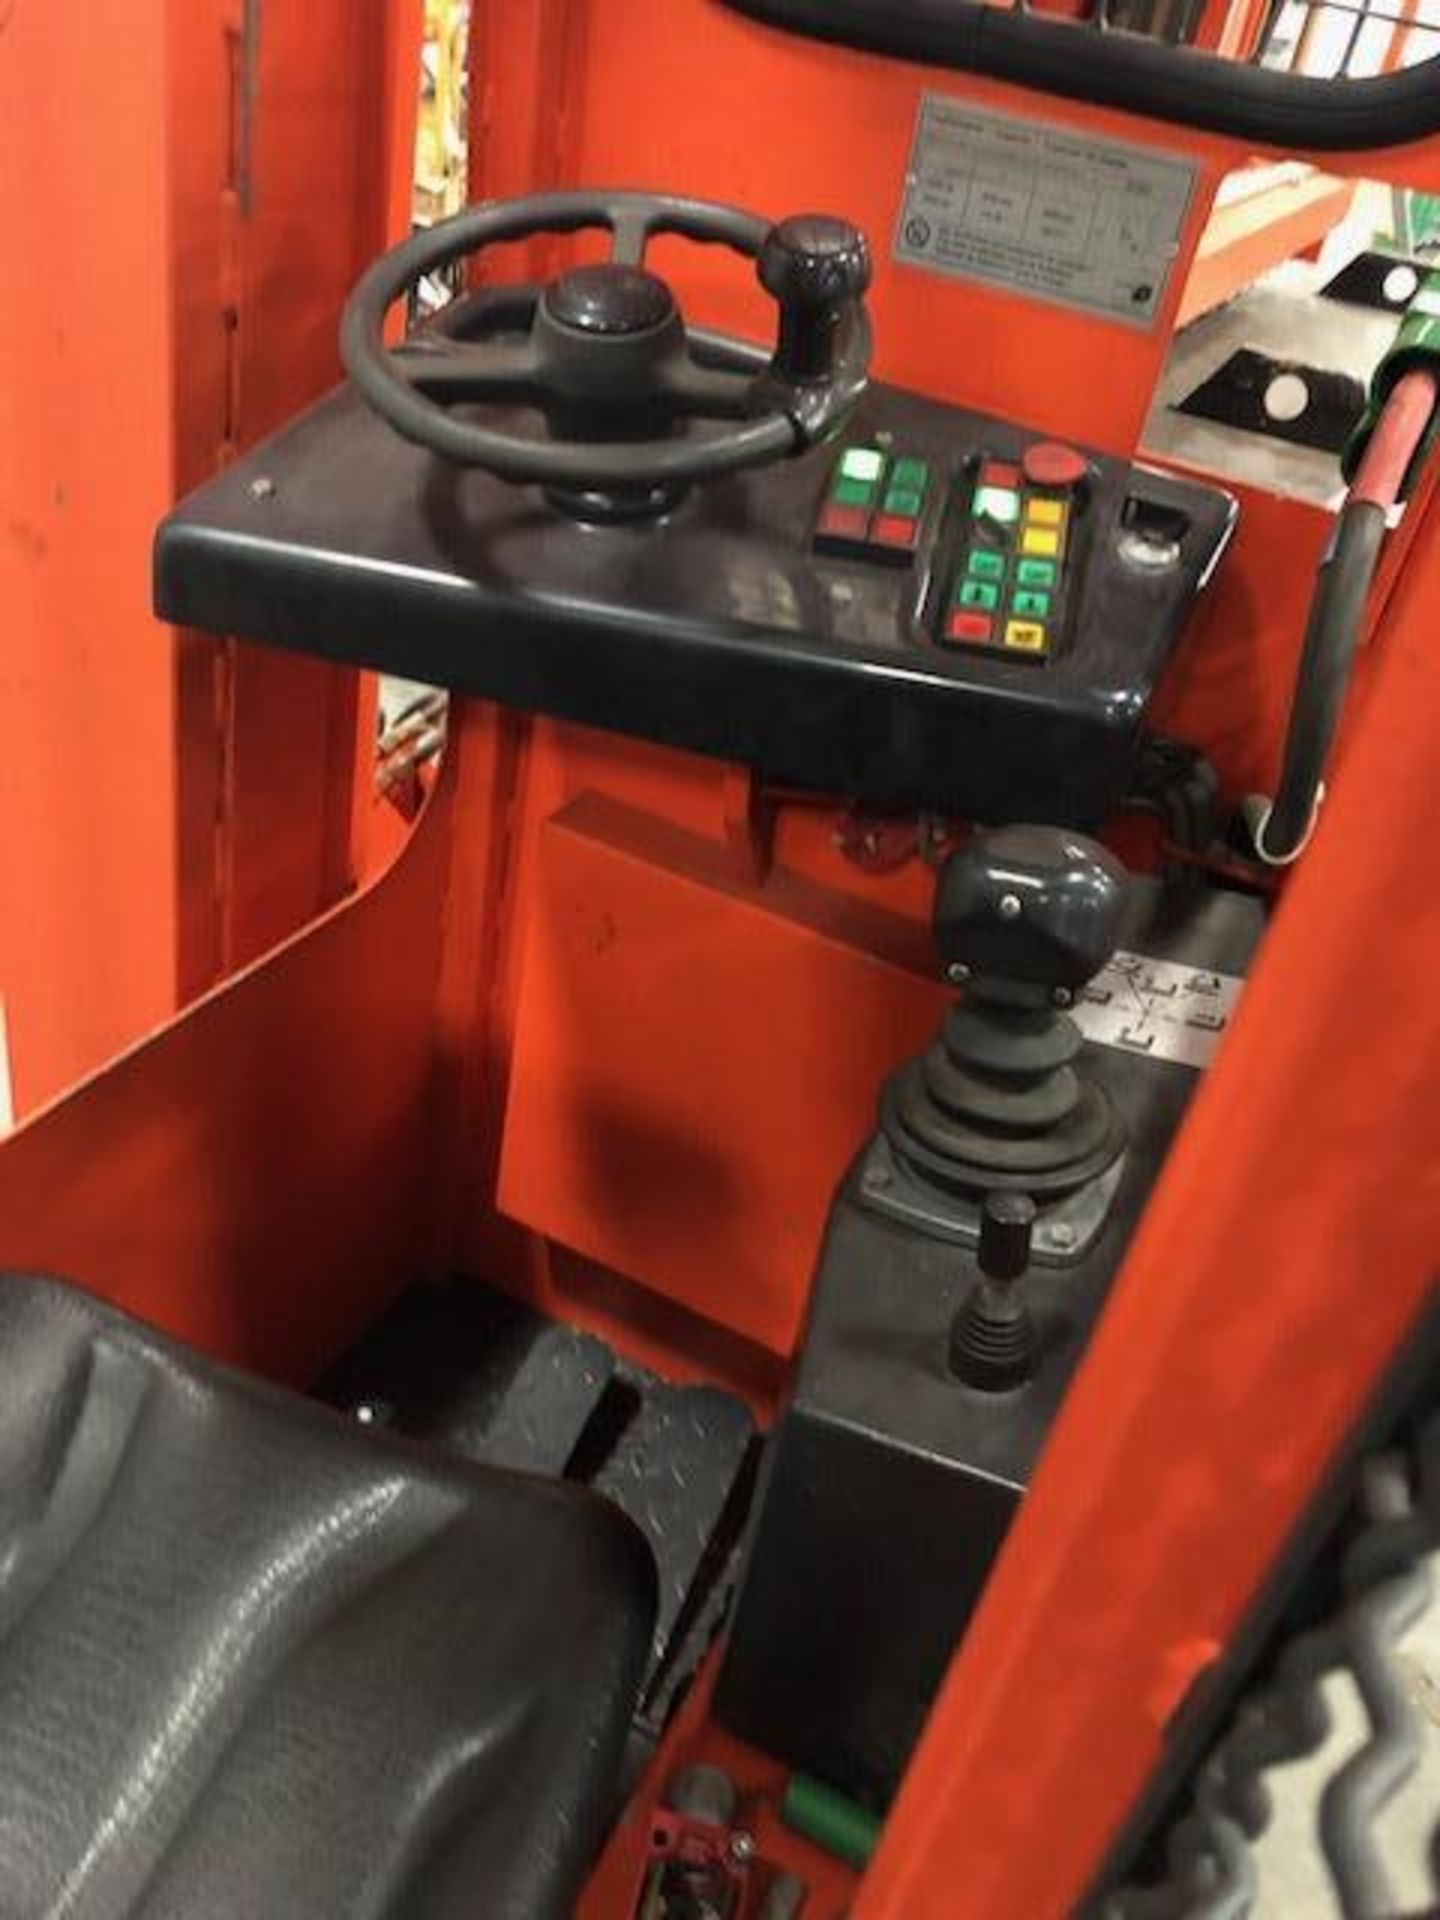 HUBTEX ELECTRIC FORKLIFT W/ROTATING TIRES FOR MULTI-DIRECTIONAL DRIVING - Image 12 of 17